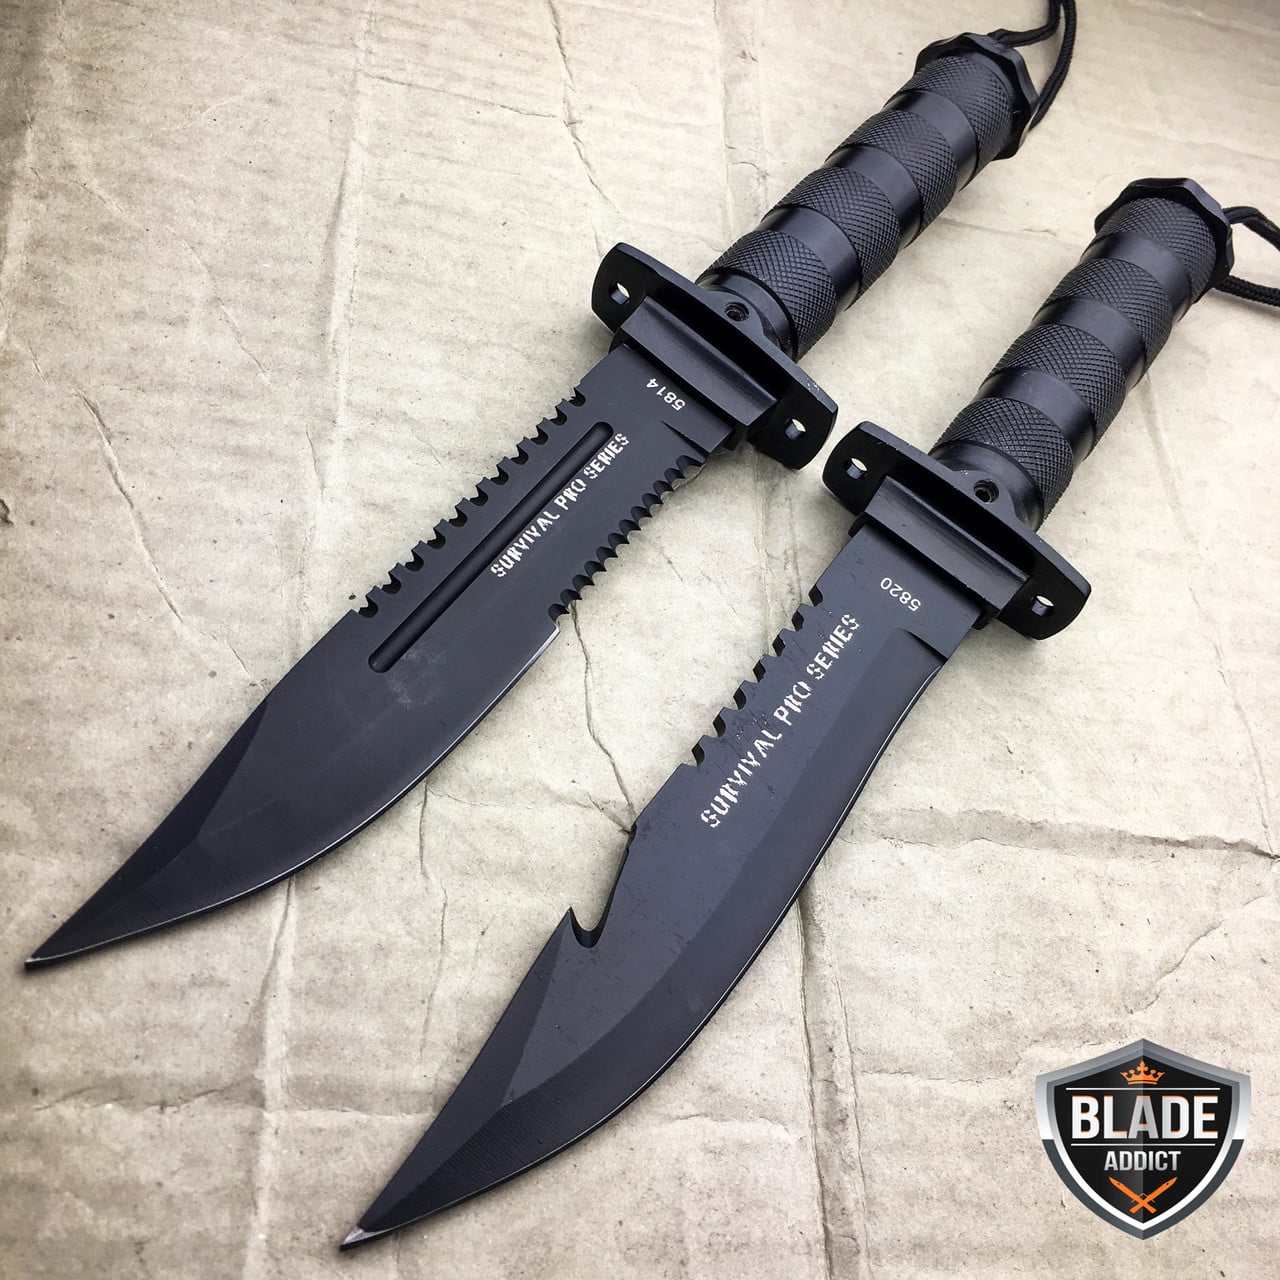 2PC 11" Tactical Fishing Hunting Fixed Blade Knife + Sheath + Survival Kit NEW